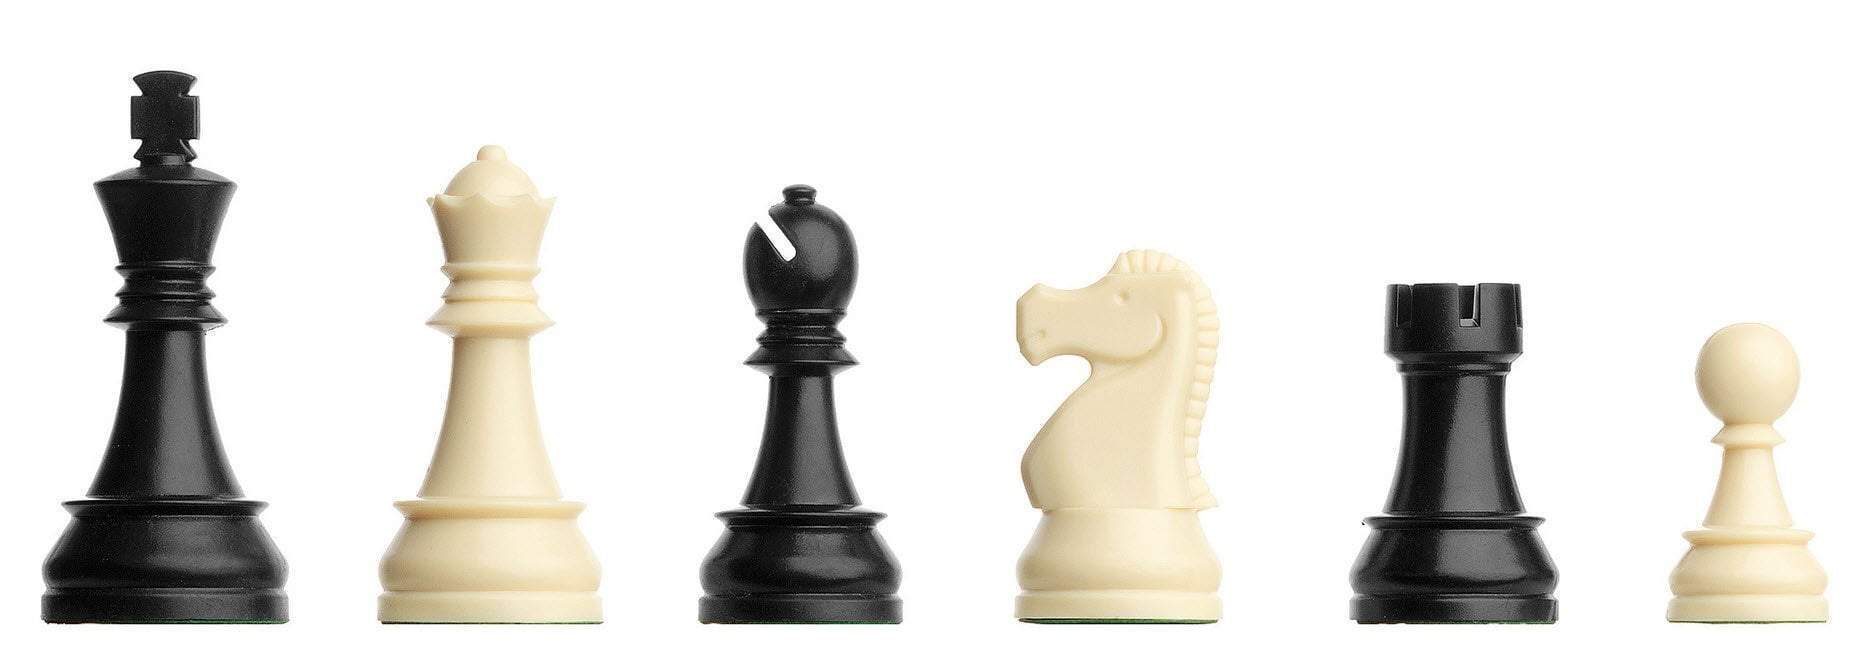 SINGLE REPLACEMENT PIECES: 3 3/4" DGT Electronic Plastic Chess Pieces Weighted - Parts - Chess-House